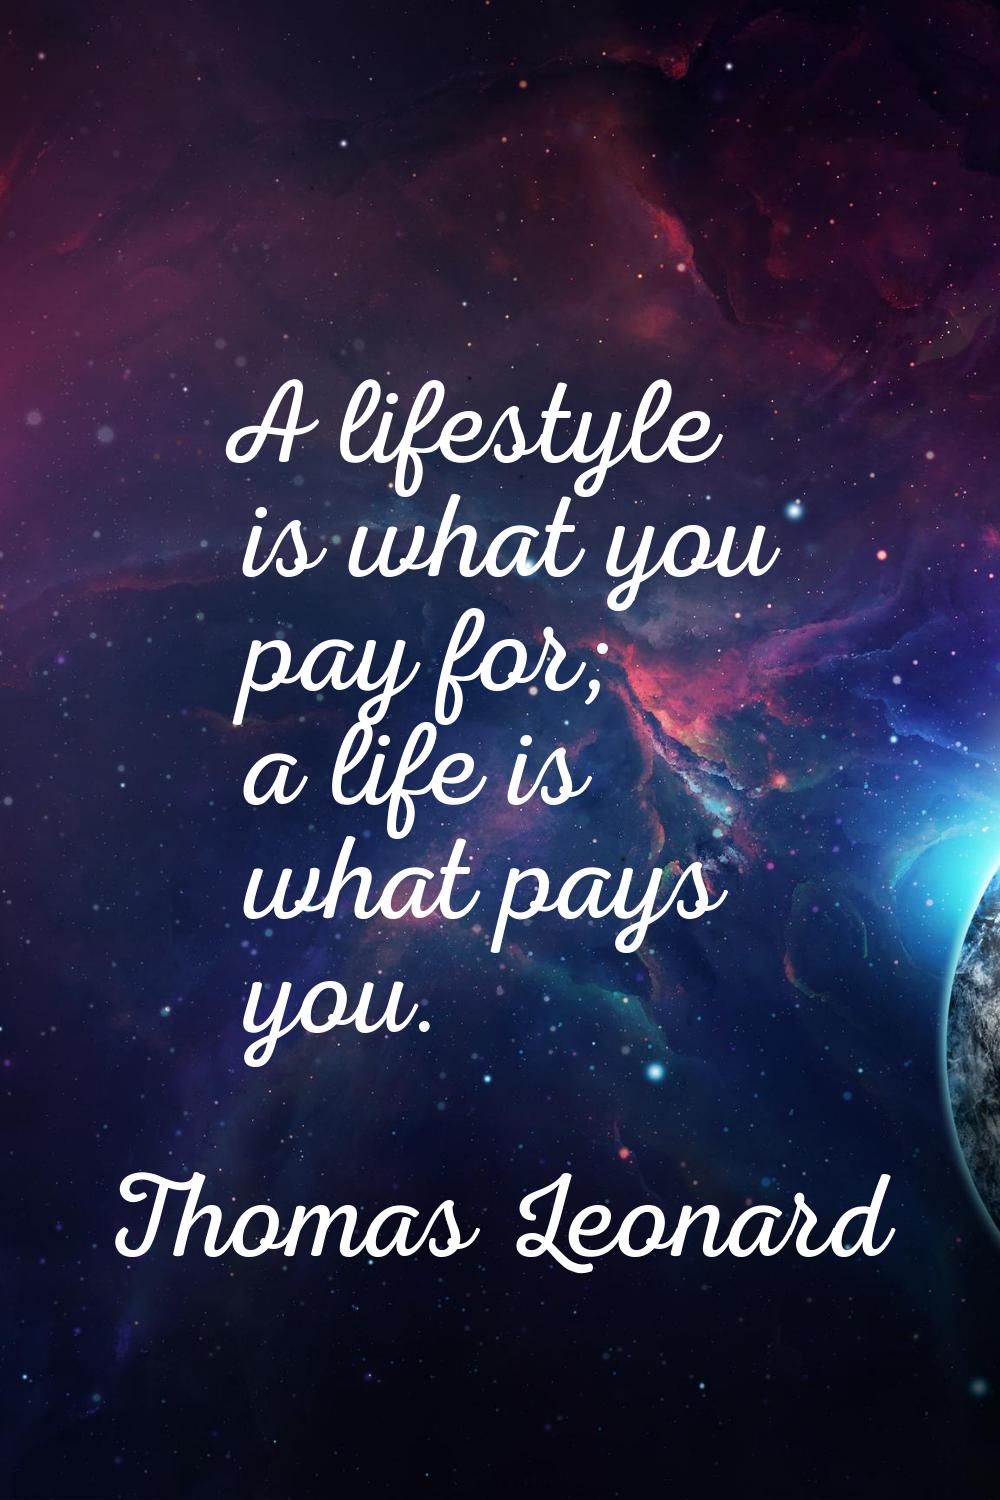 A lifestyle is what you pay for; a life is what pays you.